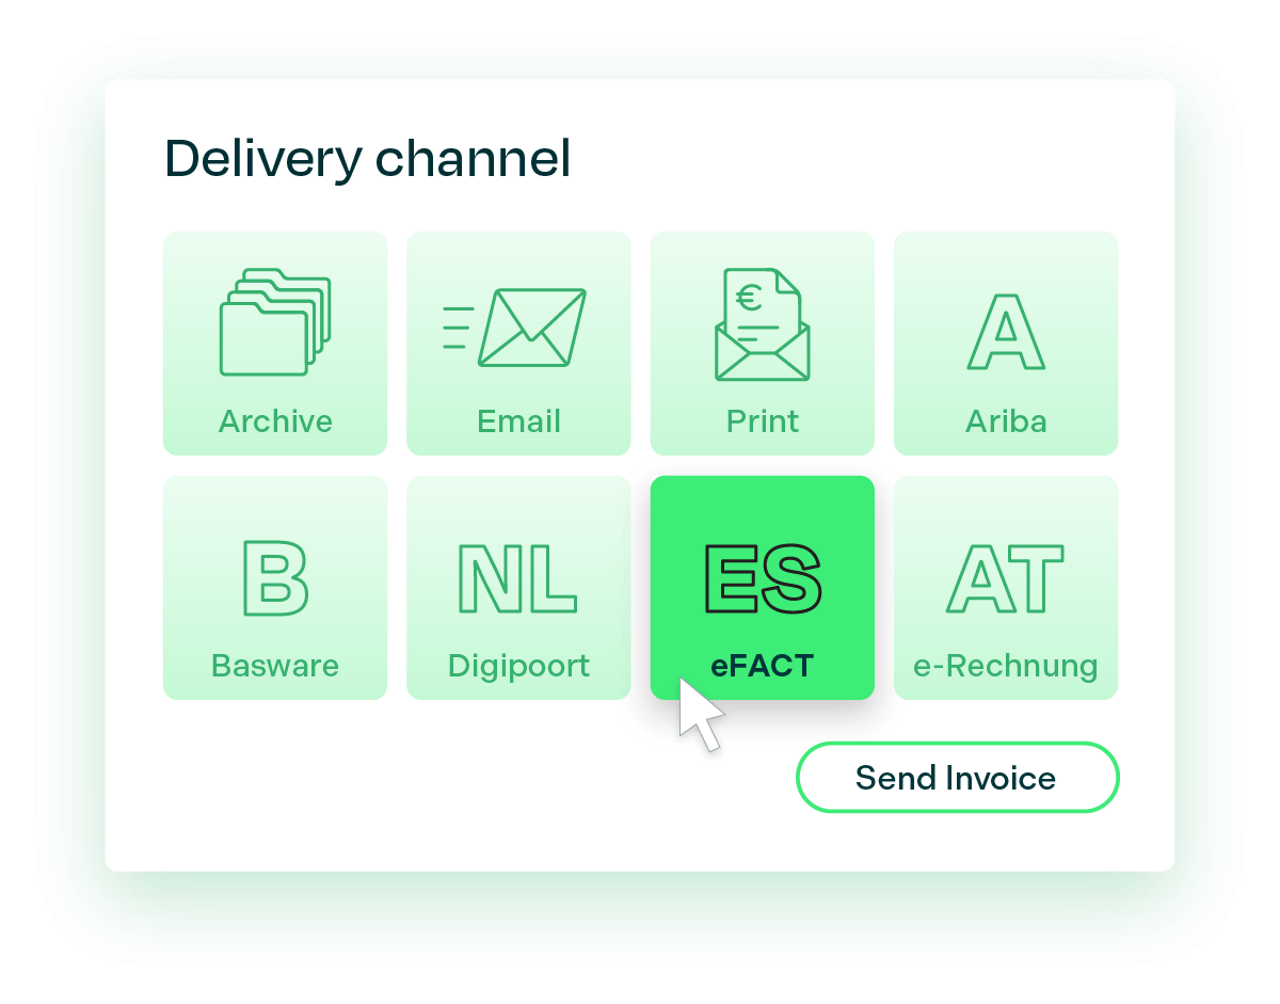 Invoice delivery channels interface